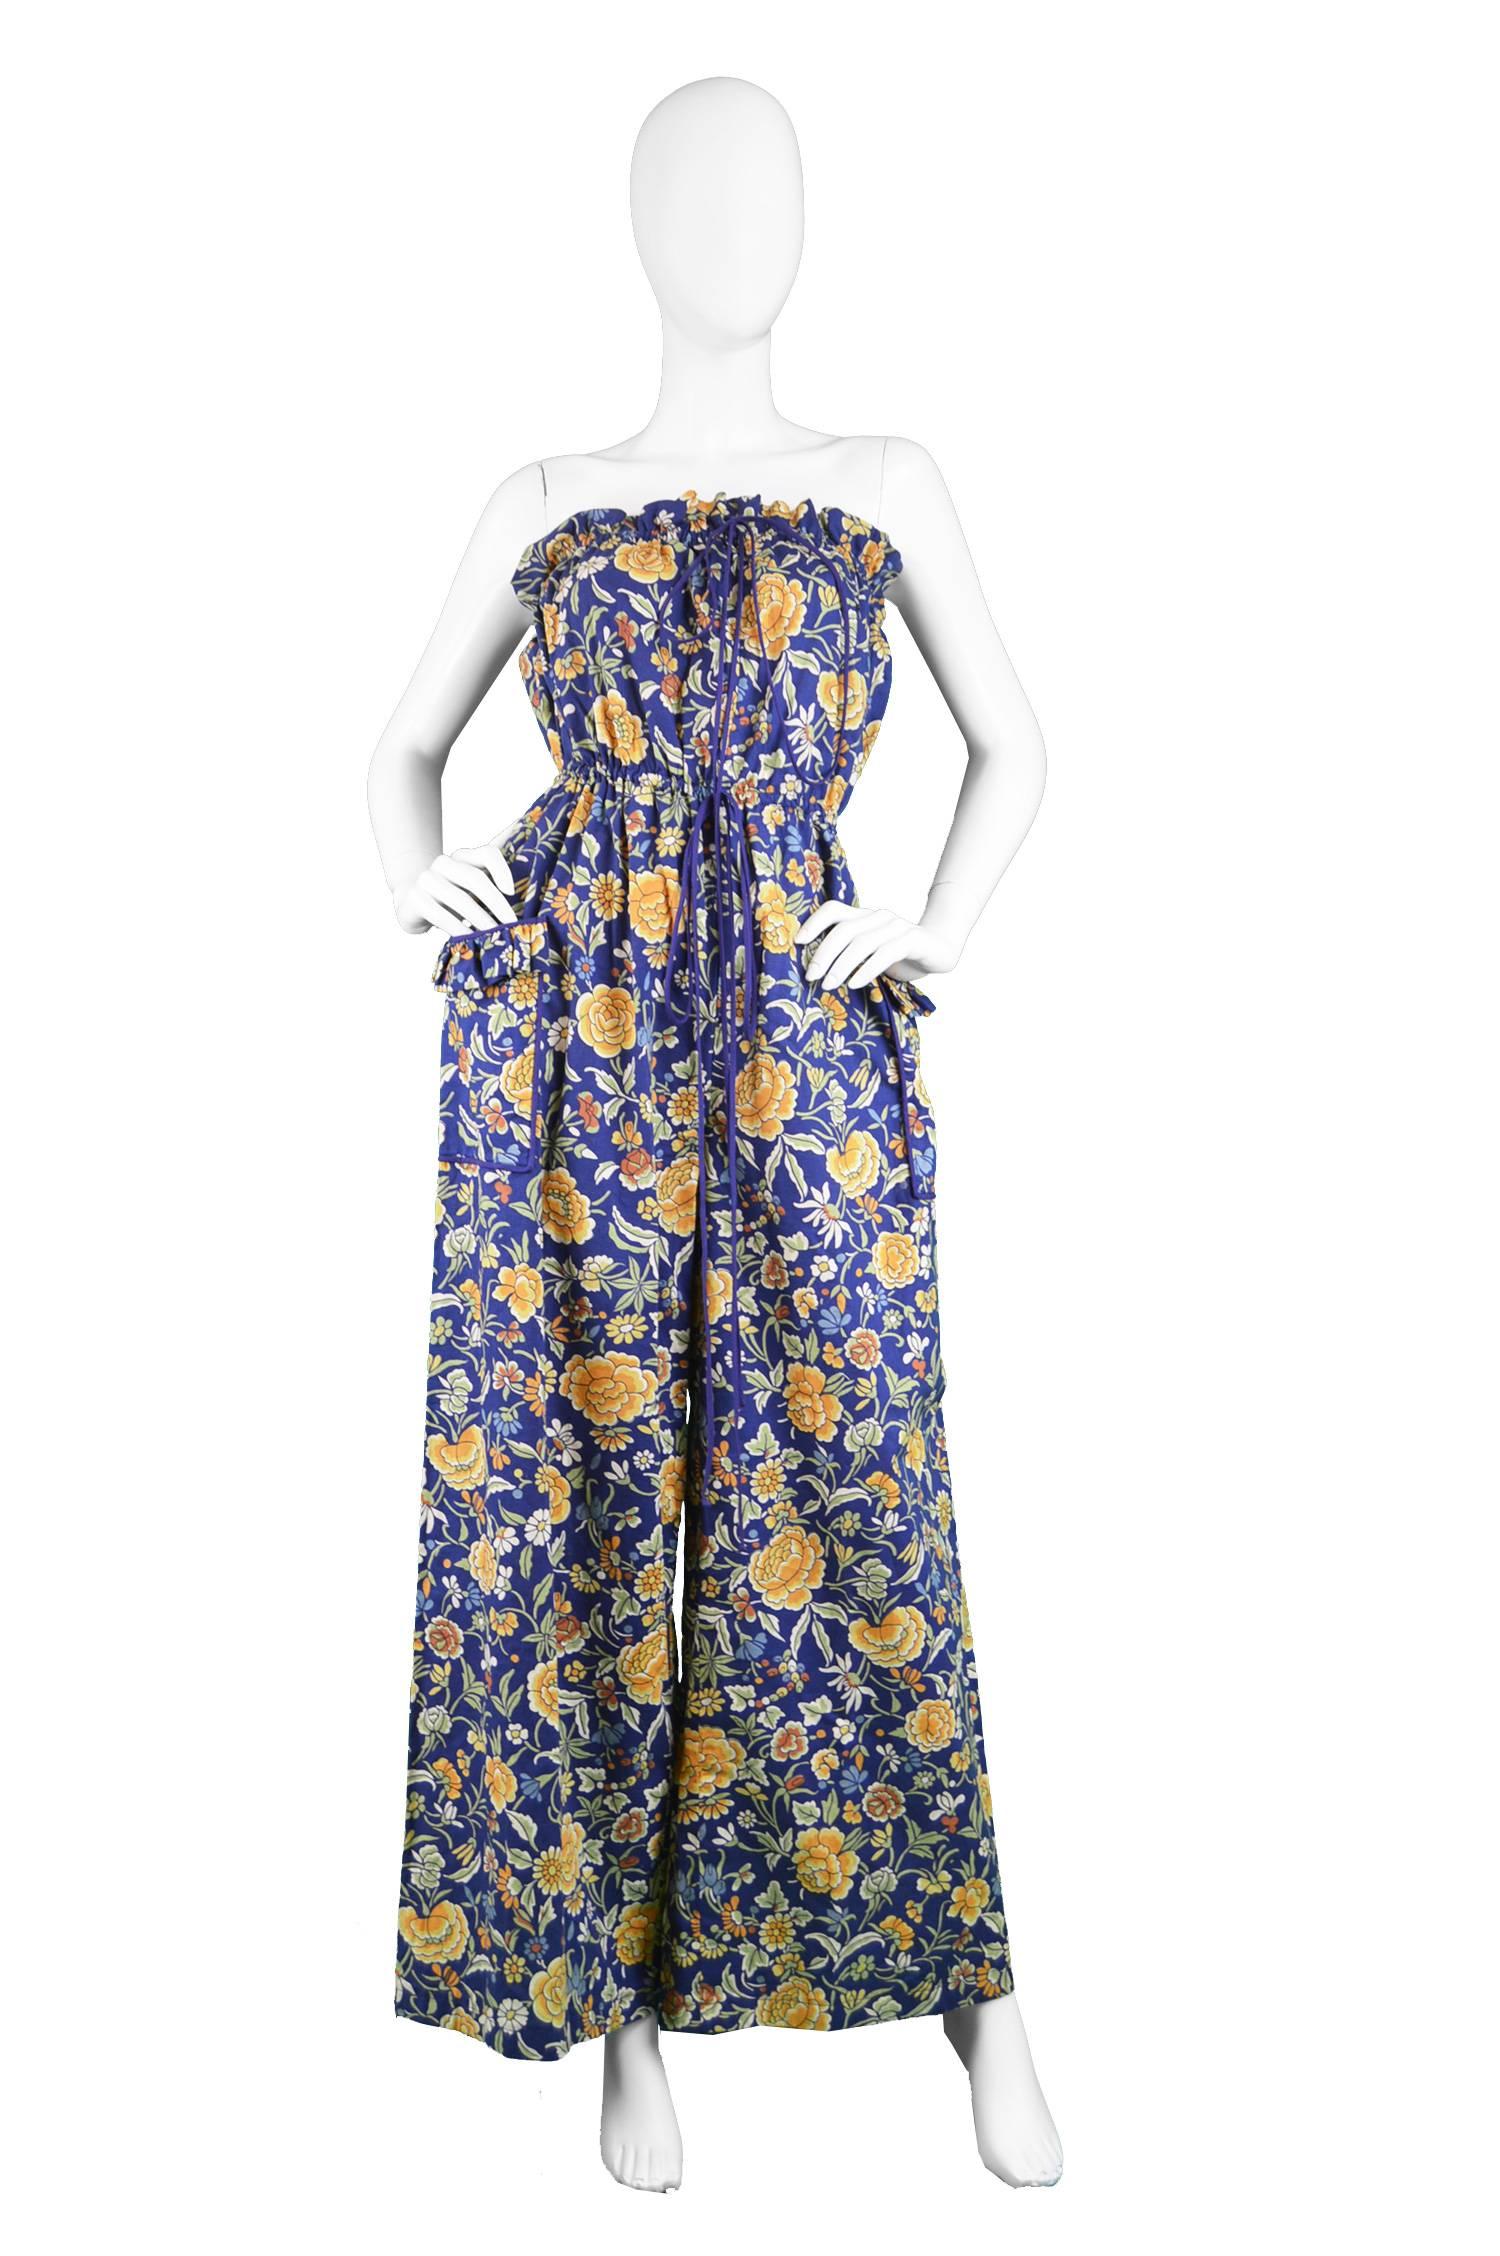 A stunning vintage women's jumpsuit from the 70s by British boutique label 'Salvador' in one of Liberty's legendary and highly collectible printed cottons. With a wide leg, elasticated waist and strapless body - which gives such a flattering,